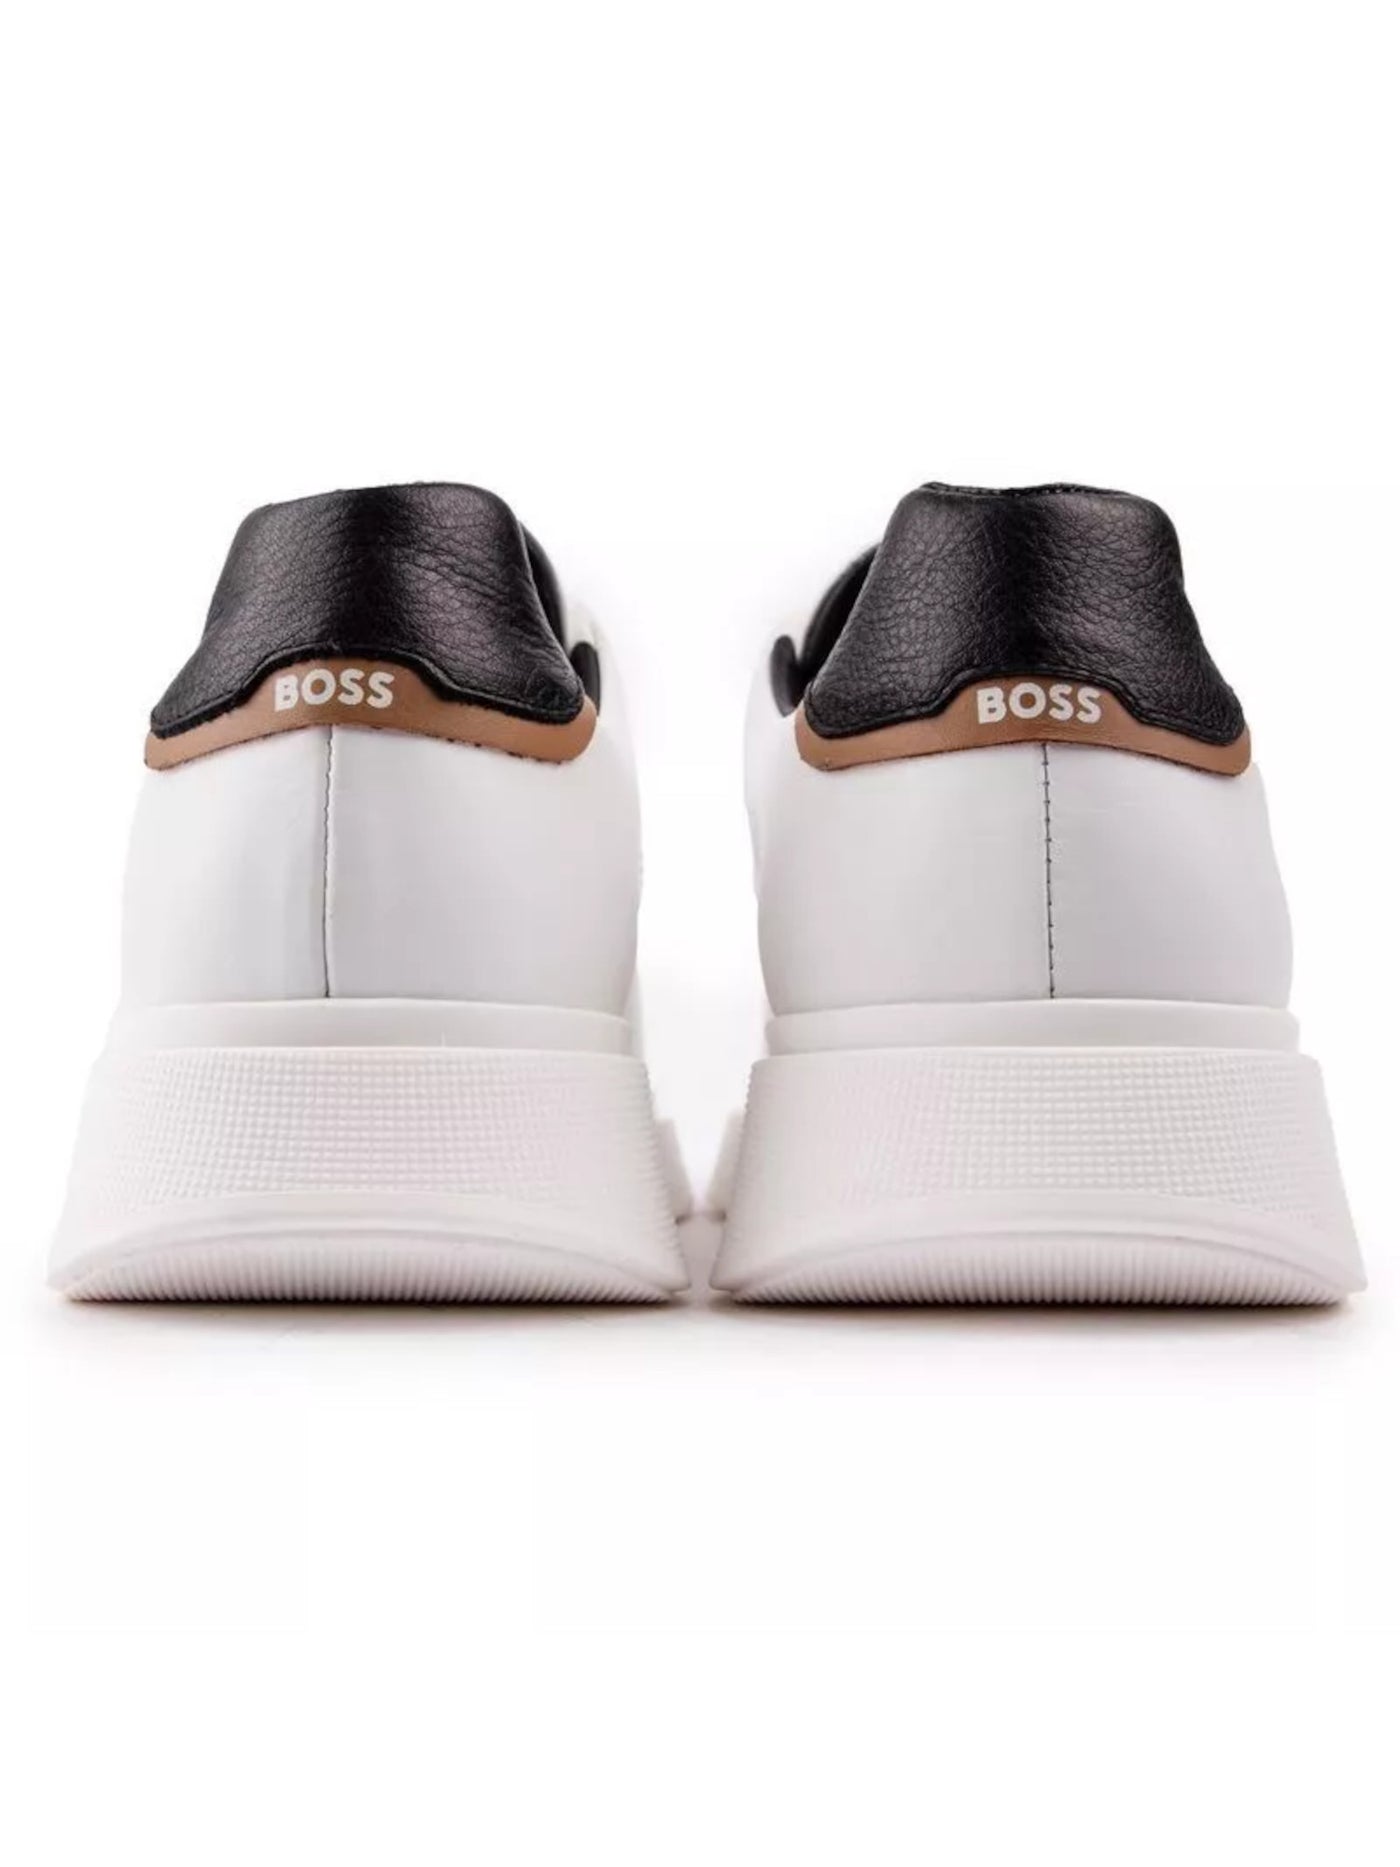 BOSS Mens White Logo Padded Bulton Round Toe Wedge Lace-Up Leather Sneakers Shoes 9